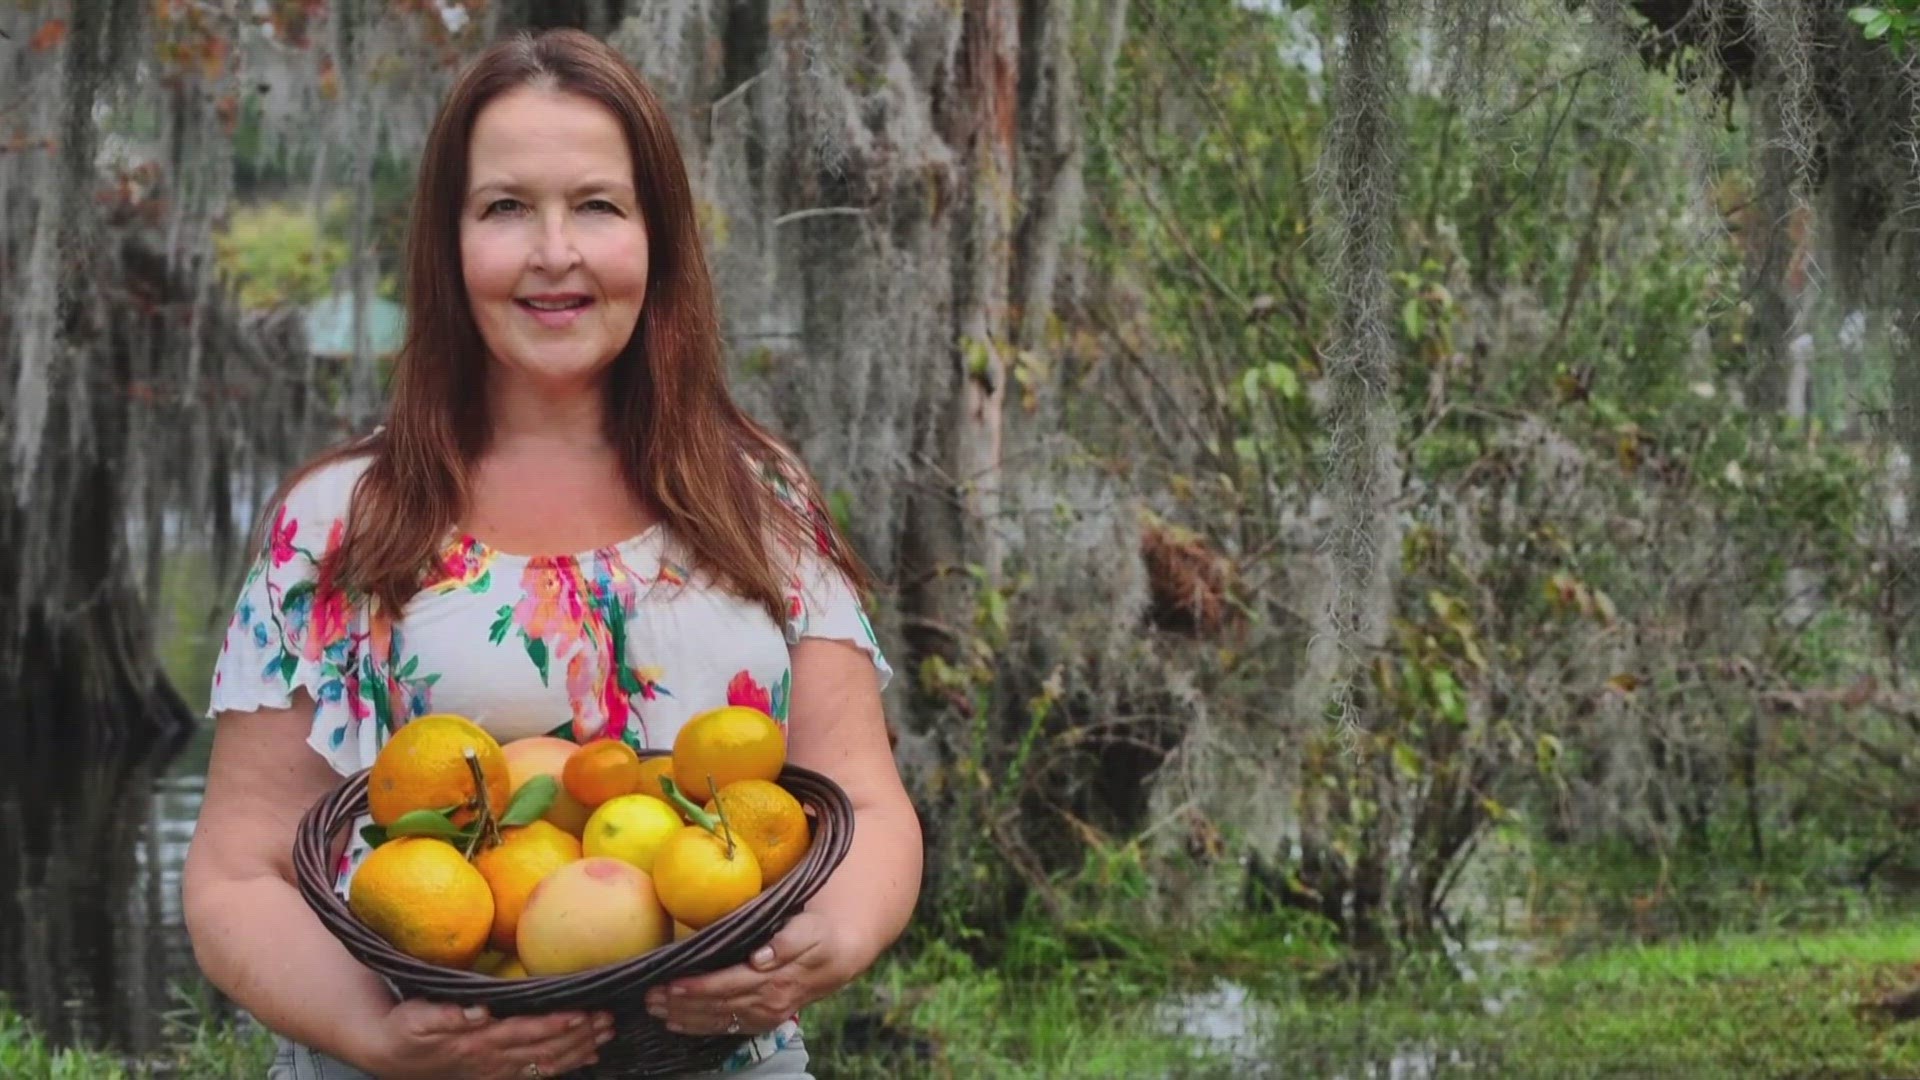 The story of how a local woman and owner of Isabelle's Orange Orchard ended up in the supply chain to some of New Orleans’ finest restaurants.